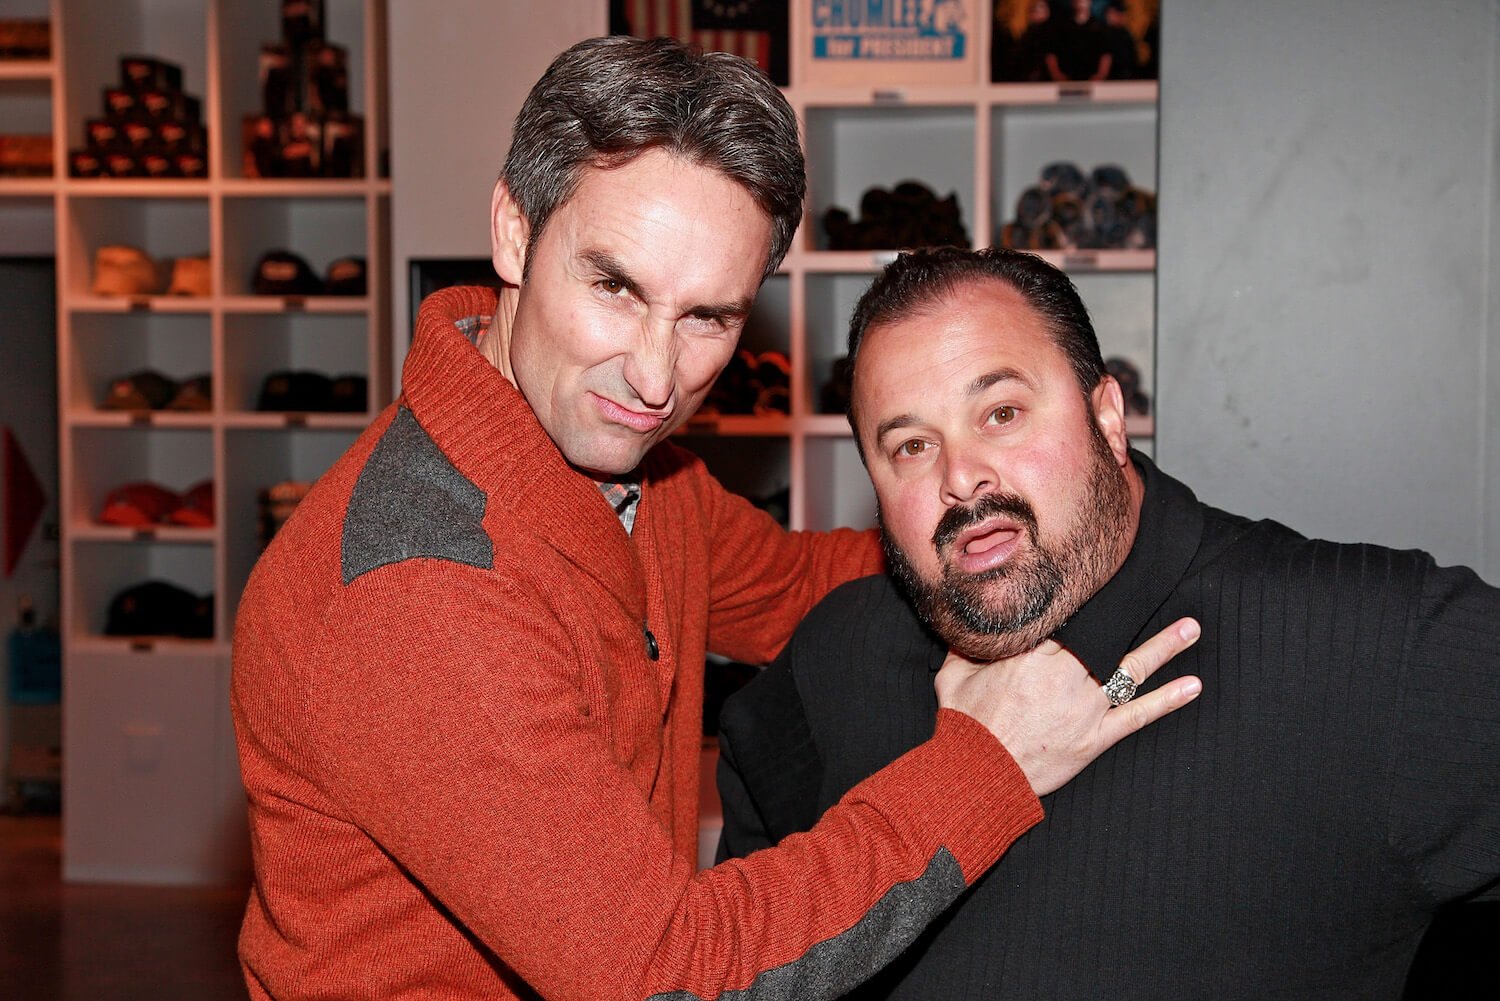 'American Pickers' star Mike Wolfe playfully choking Frank Fritz